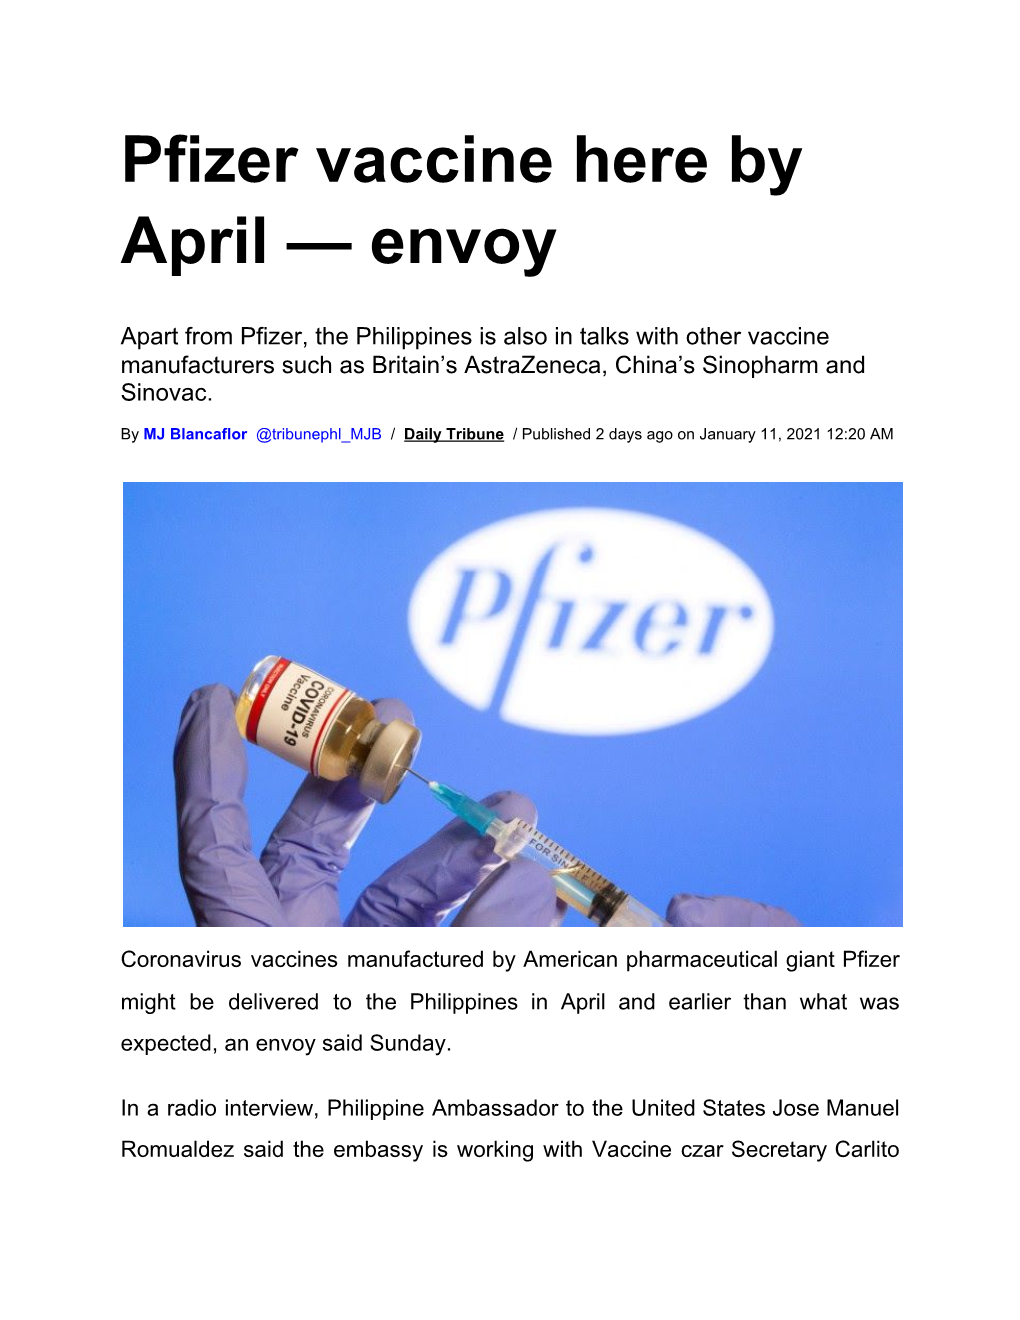 Pfizer Vaccine Here by April — Envoy